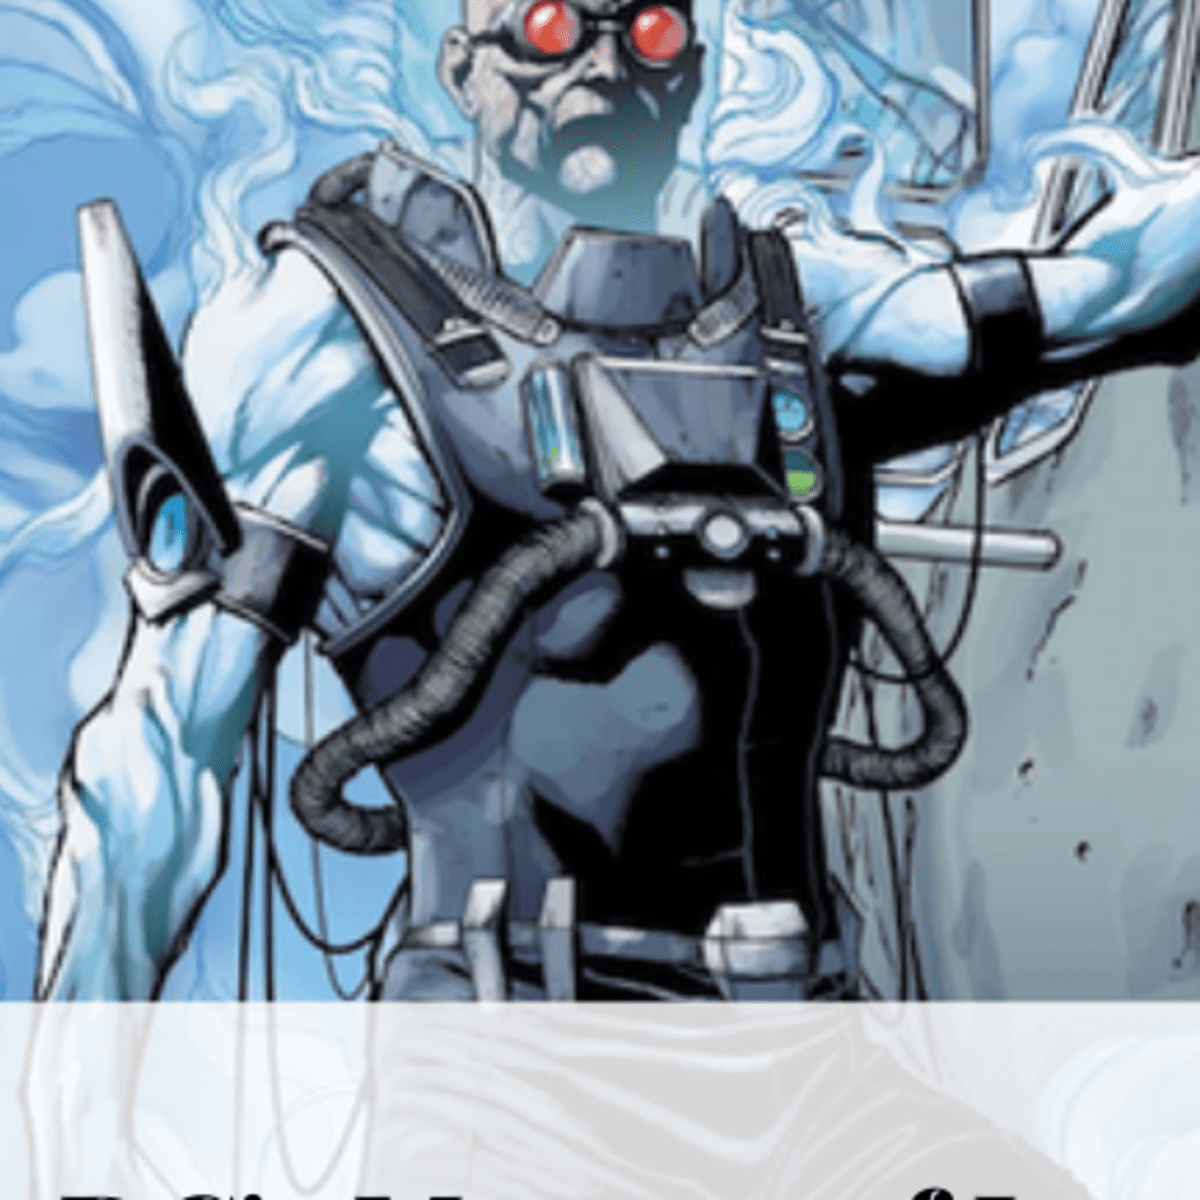 Drawing Fantasy Art: How To Draw A Robot - HubPages